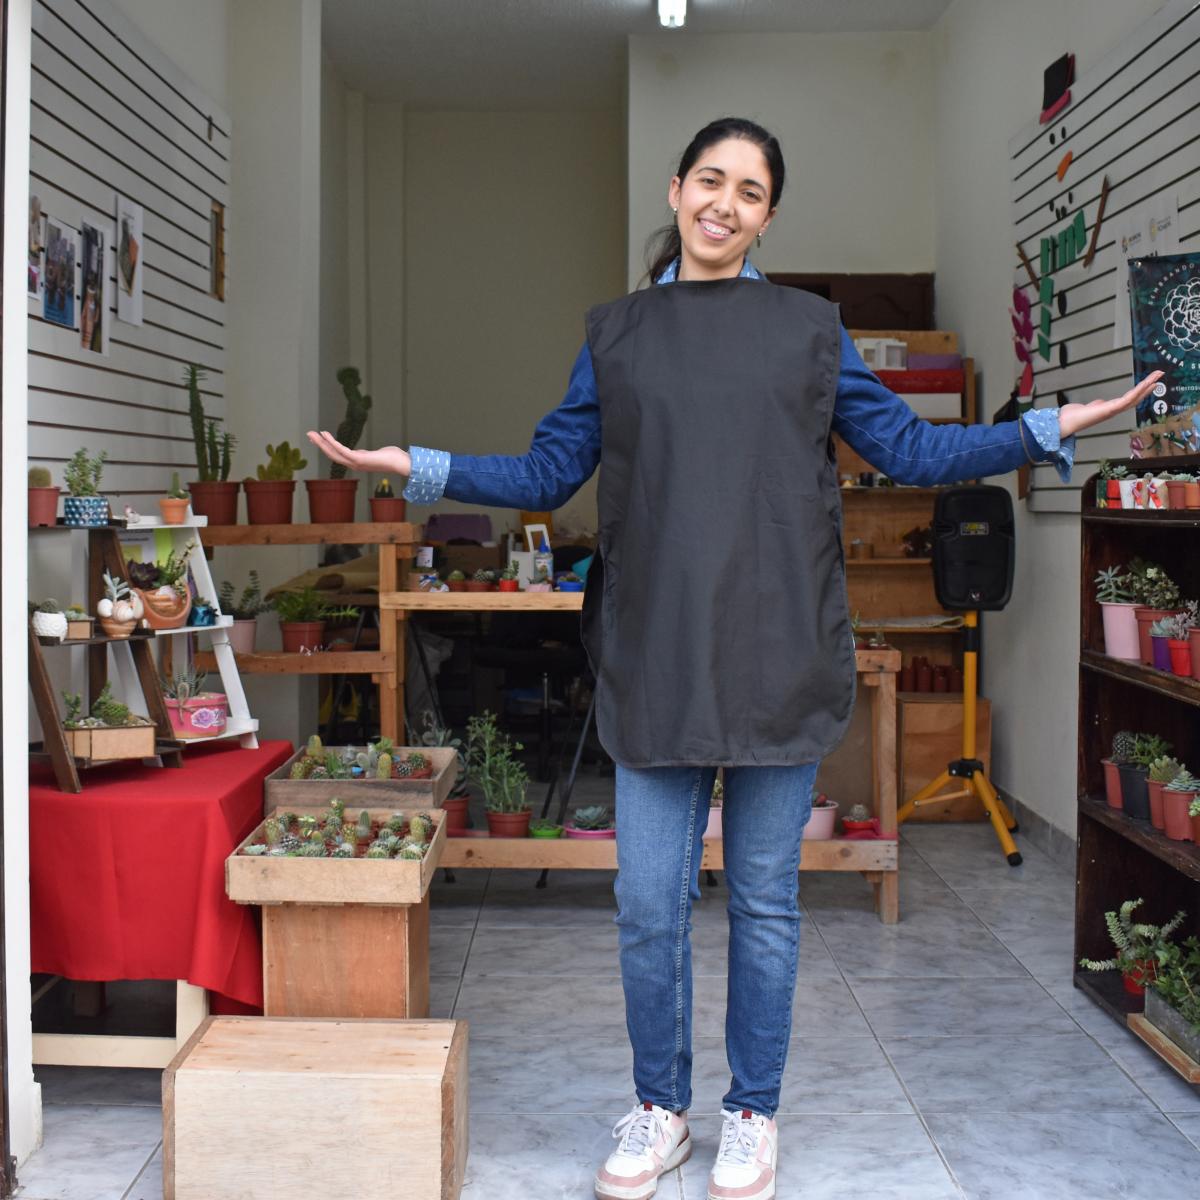 This is a picture of Omaira, the main character, standing in front of her little store with arms open, welcoming people. She is in jeans, a long-sleeved shirt, sneakers, and and black apron. There are plants on shelves.